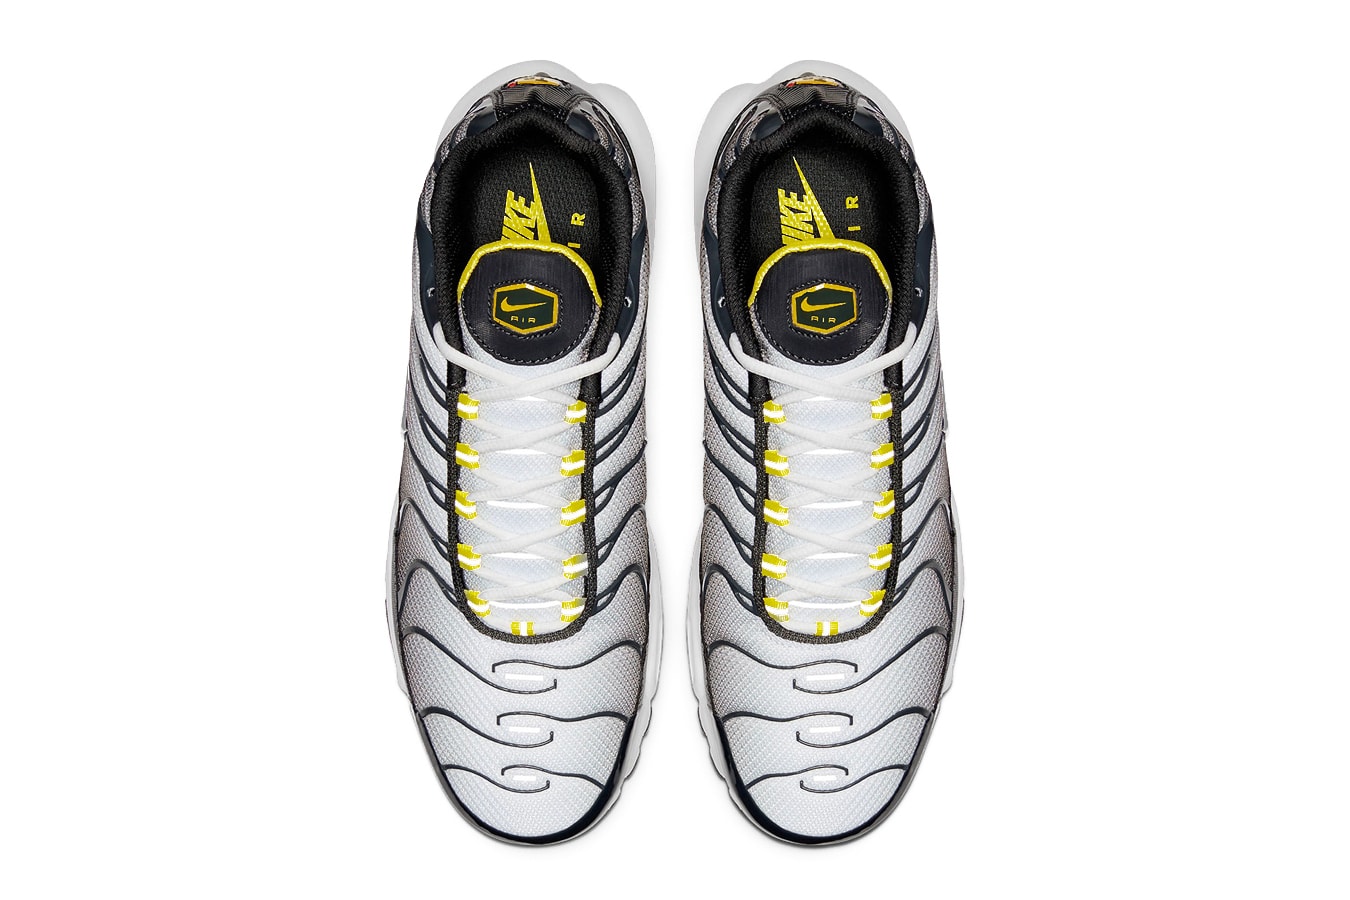 Nike Electrifies Air Max Plus With "Bumble Bee" Colorway grey black yellow footwear release drop date images price info